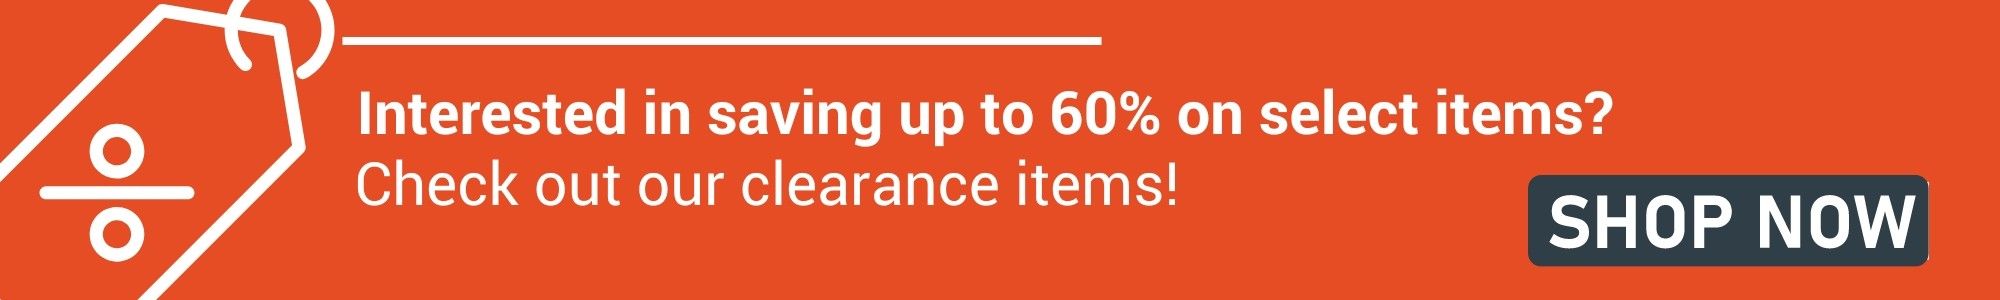 Interested in saving up to 60%. Check out our clearance items!